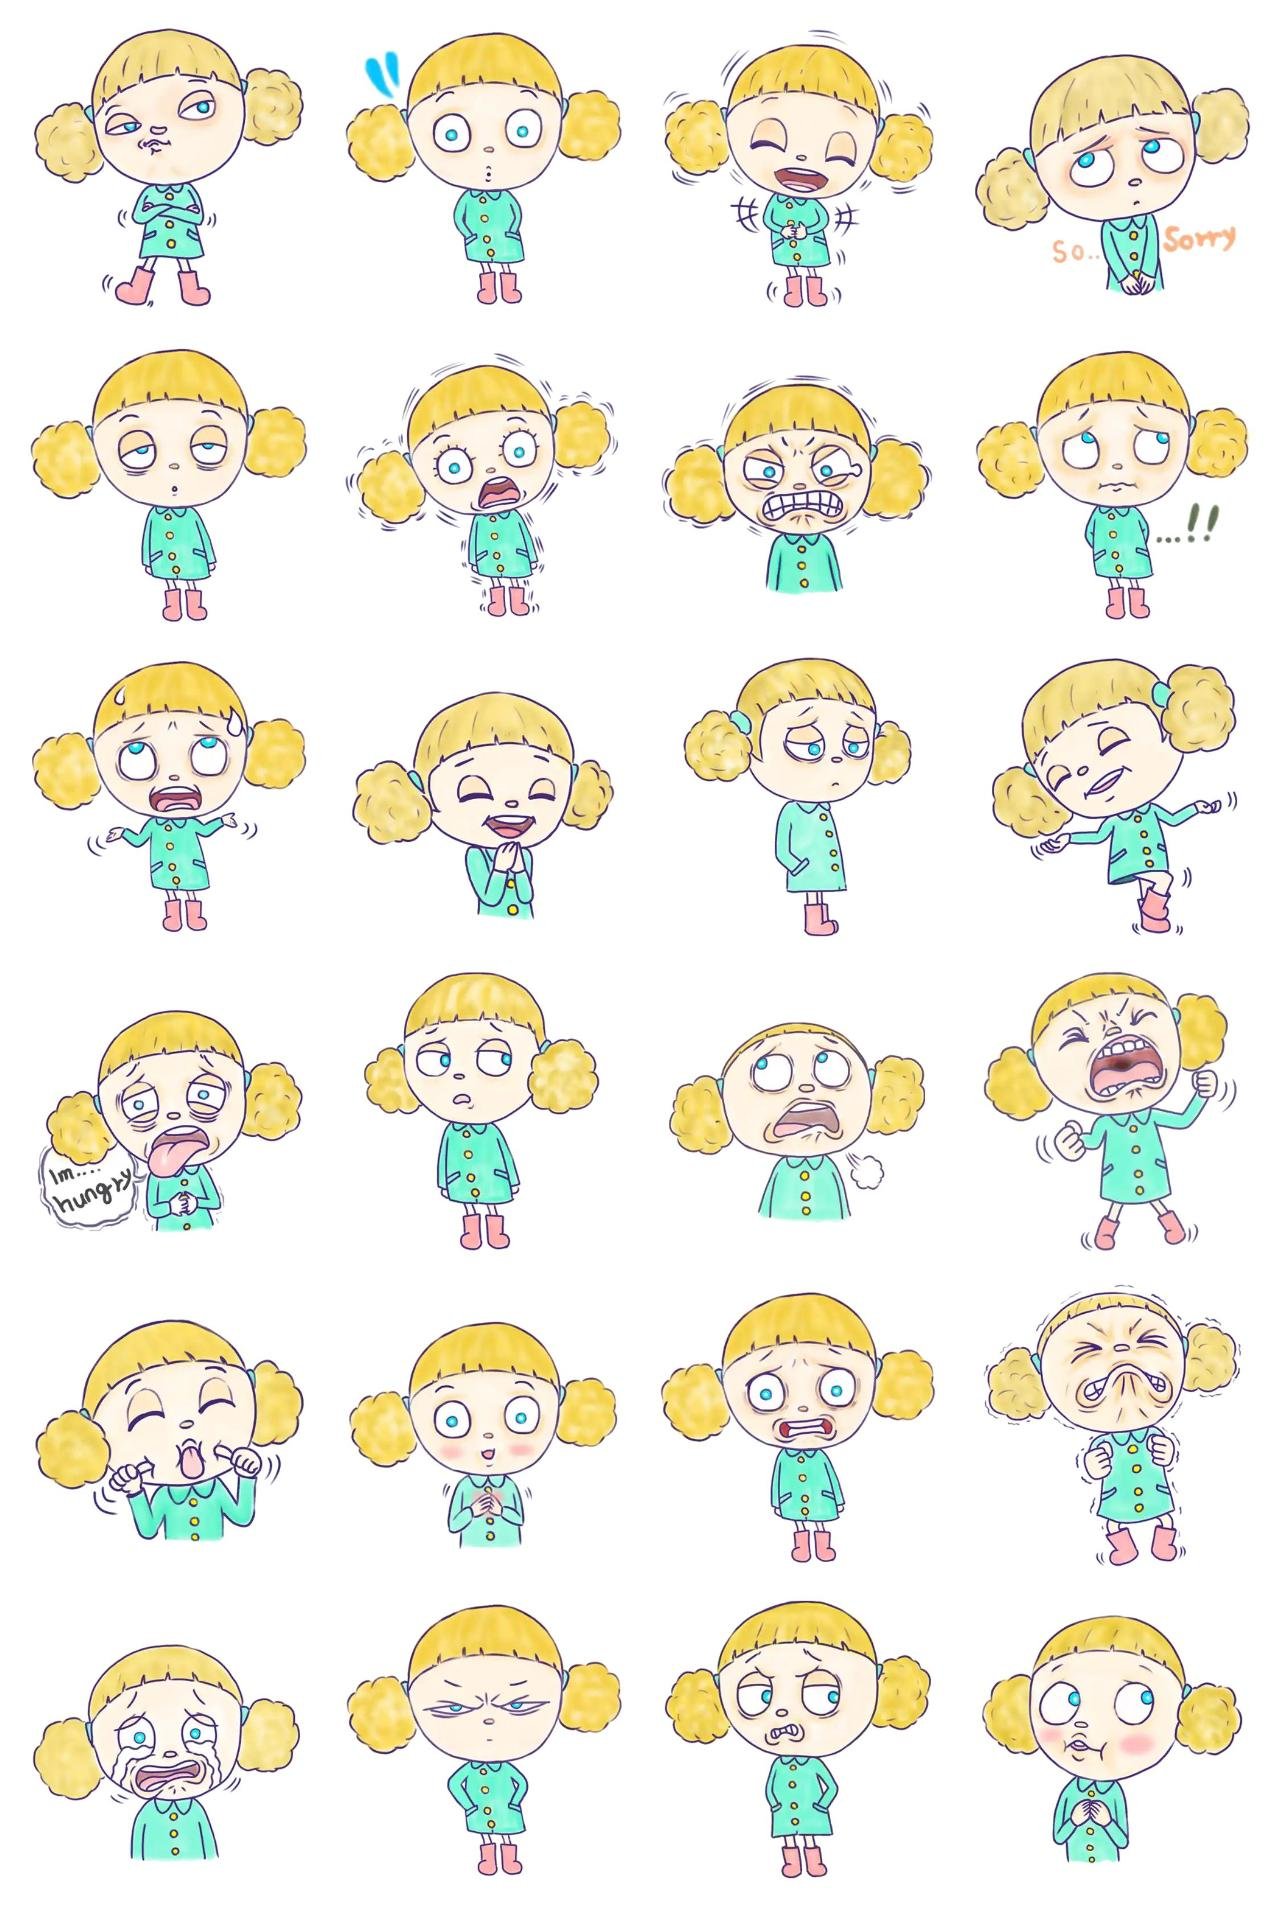 Mari the emotional girl People sticker pack for Whatsapp, Telegram, Signal, and others chatting and message apps